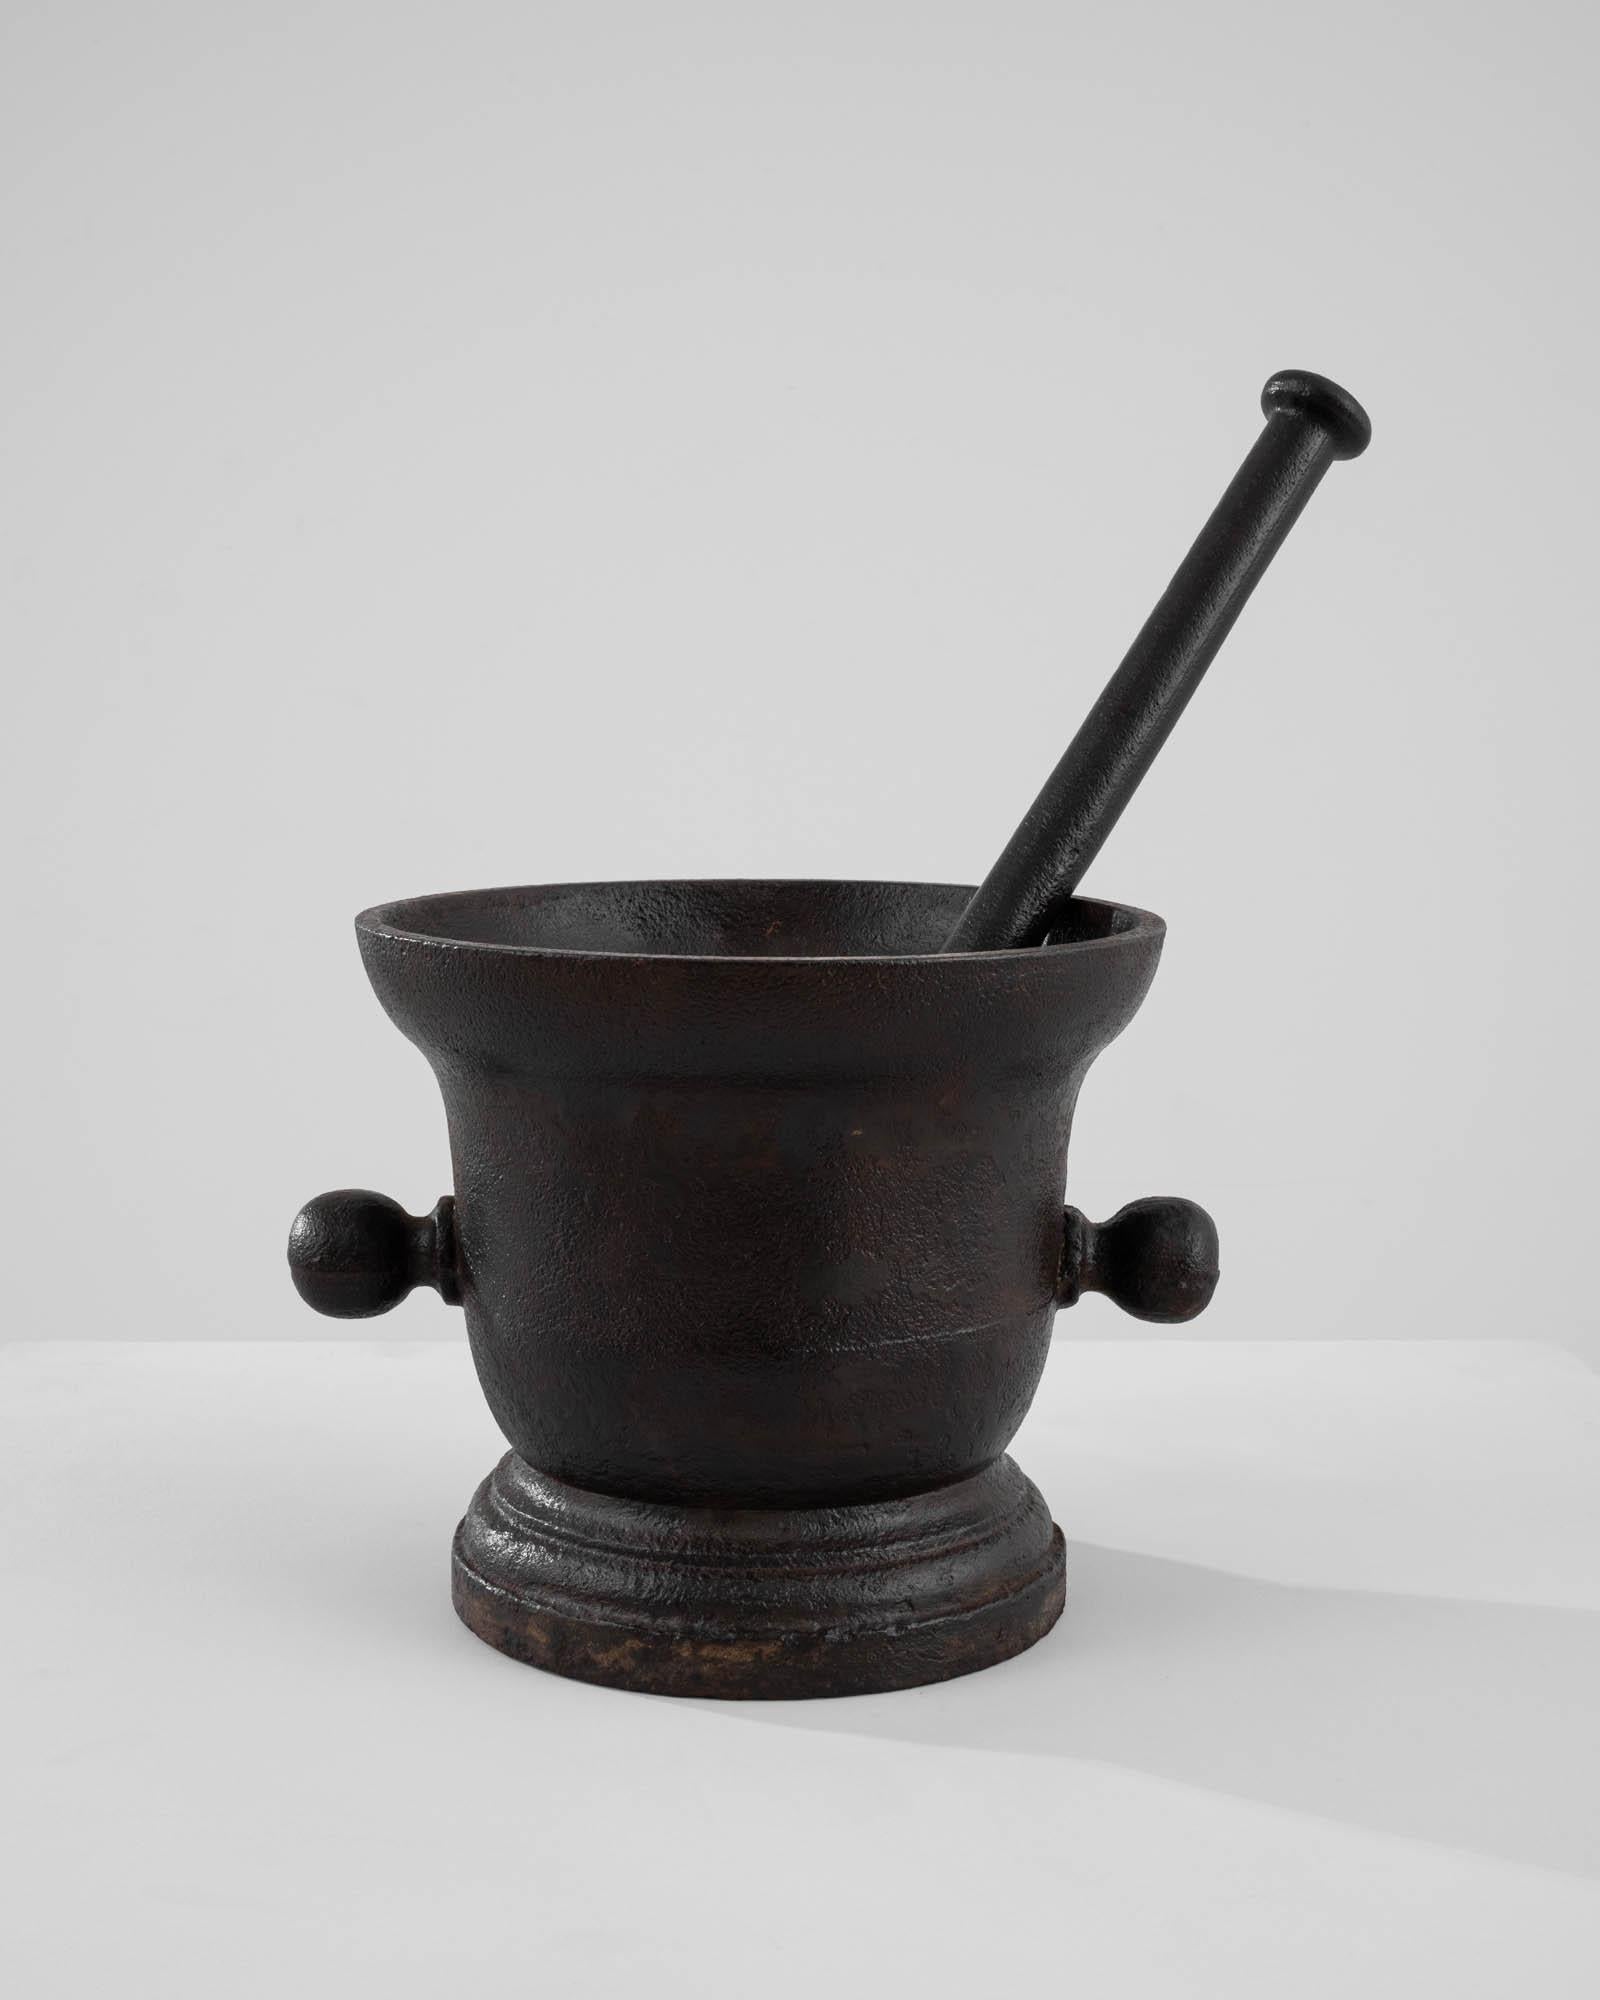 With its solid proportions and sculptural form, this antique cast iron mortar and pestle is a one of a kind find. Made in France in the 1800s, this piece would have been an integral part of a Provincial kitchen, or chemist– used for grinding spices